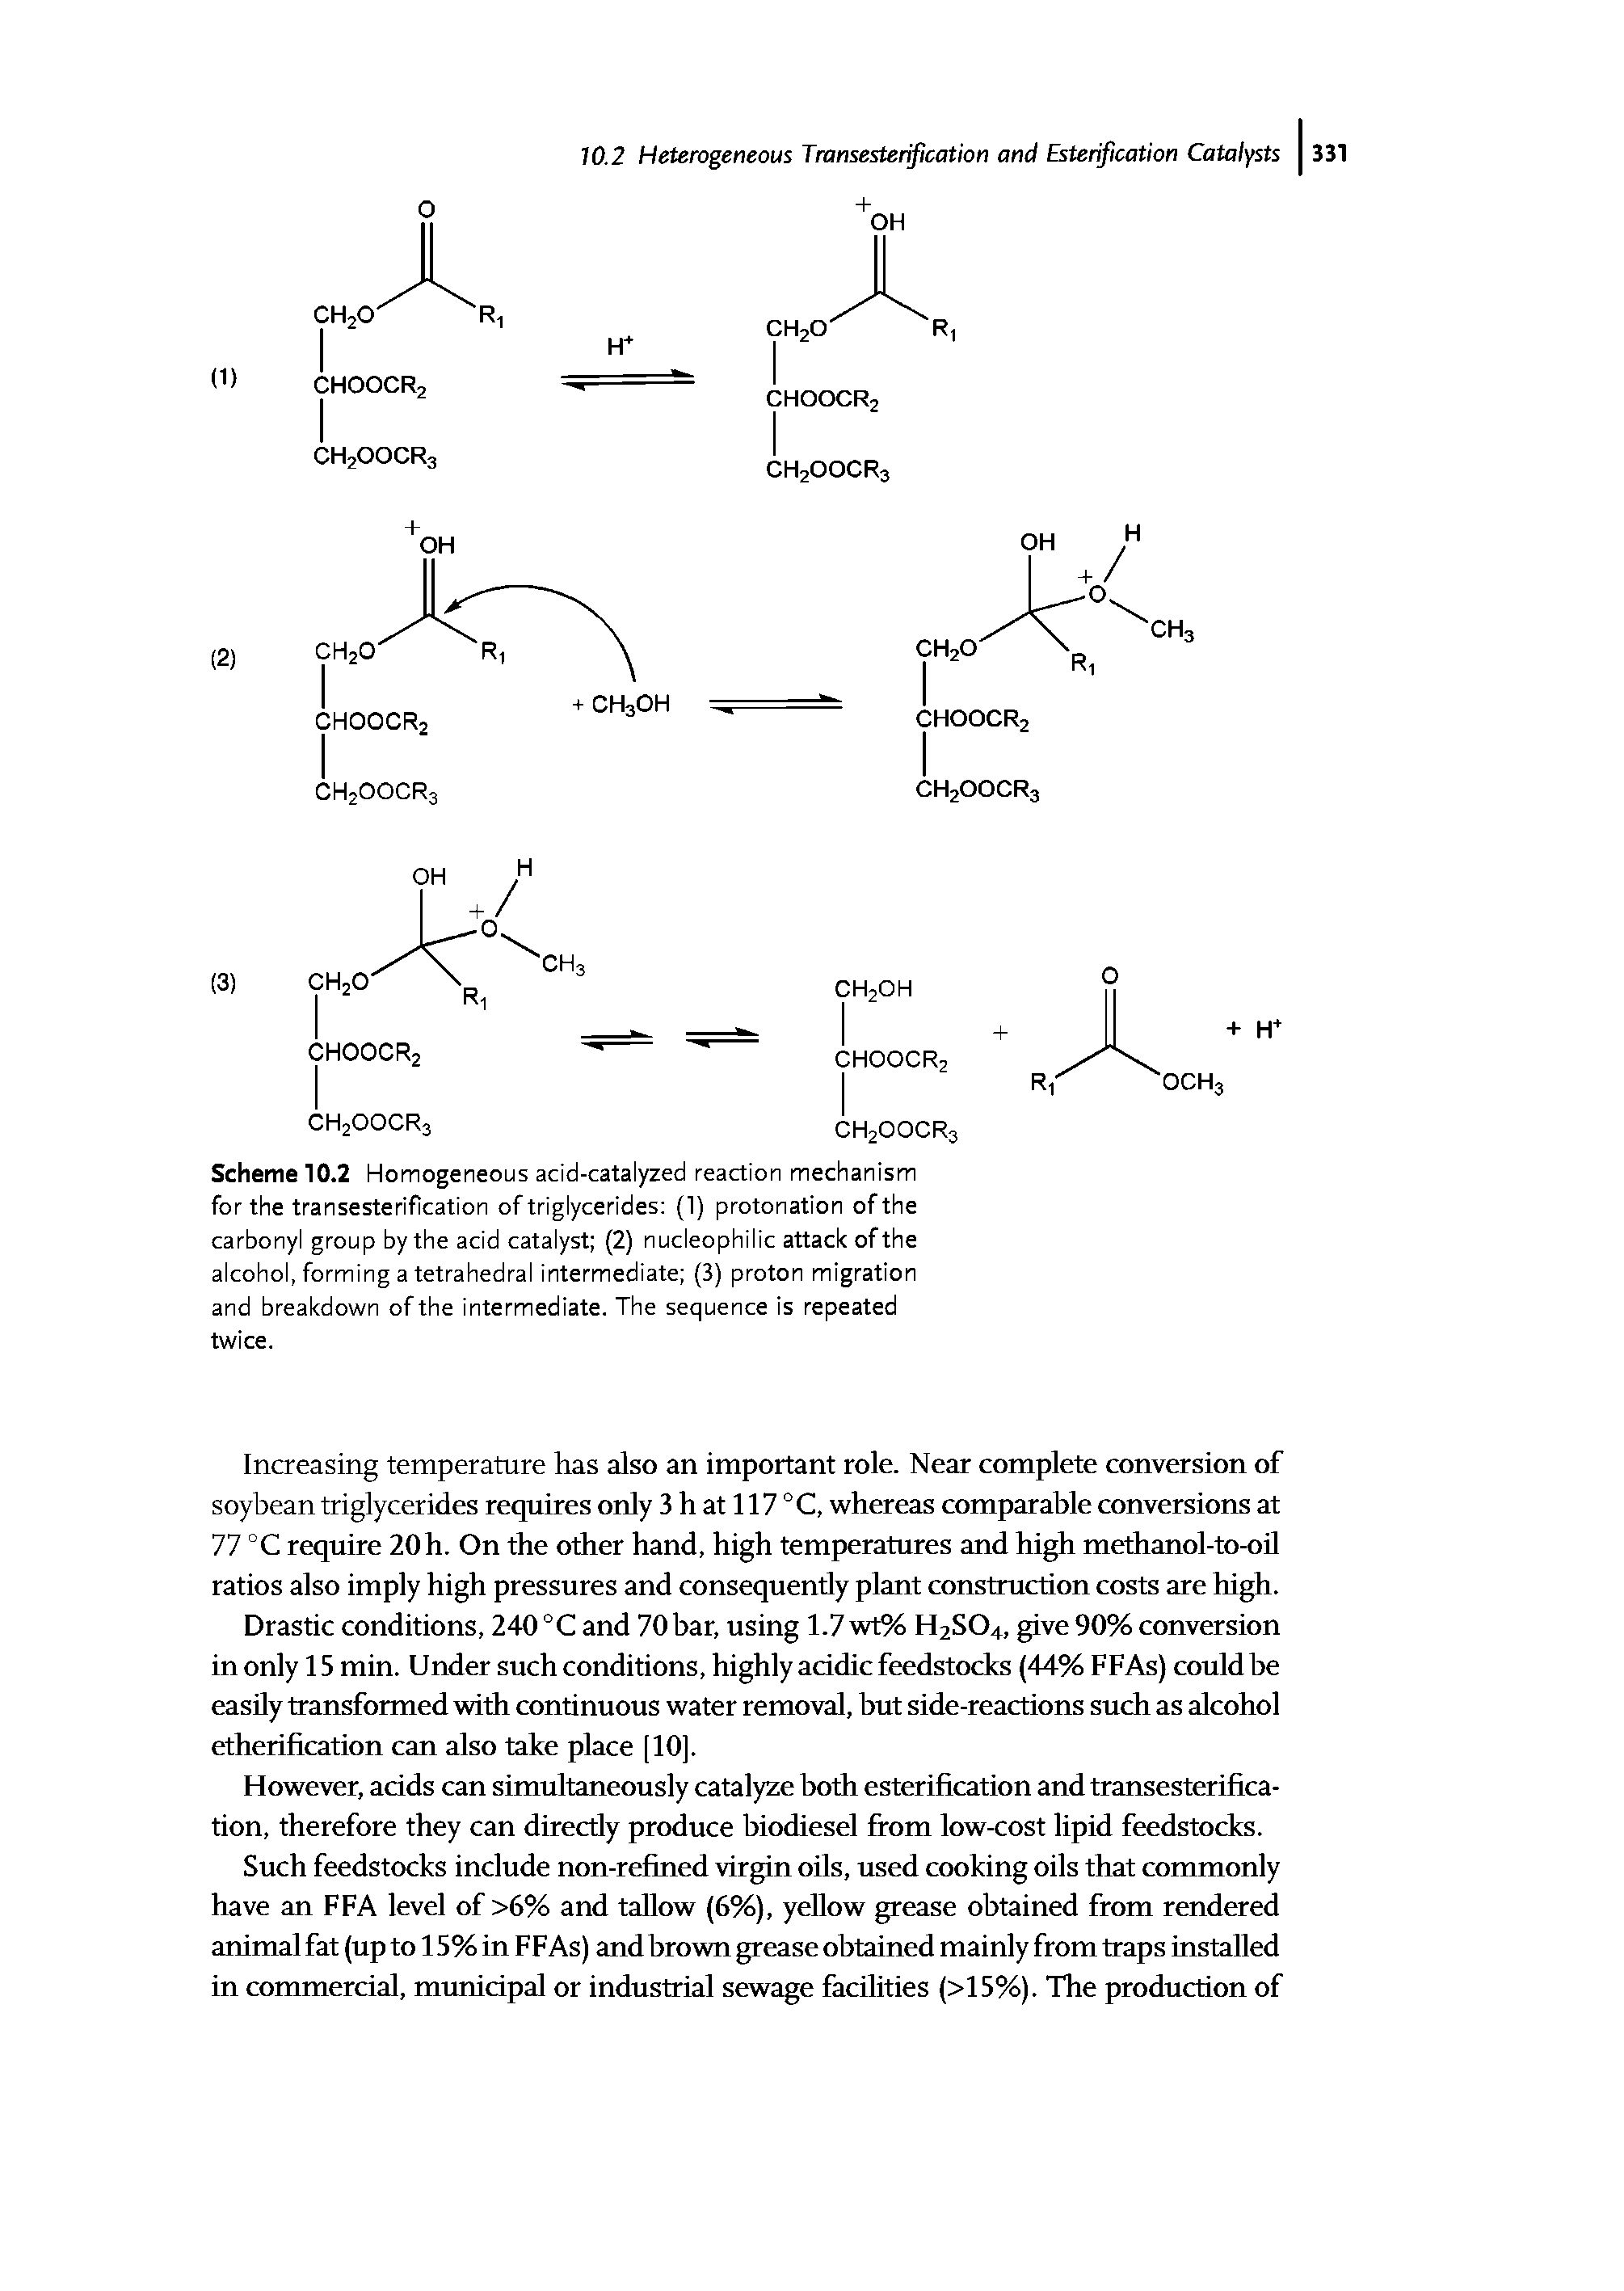 Scheme 10.2 Homogeneous acid-catalyzed reaction mechanism for the transesterification of triglycerides (1) protonation of the carbonyl group by the acid catalyst (2) nucleophilic attack of the alcohol, forming a tetrahedral intermediate (3) proton migration and breakdown of the intermediate. The sequence is repeated twice.